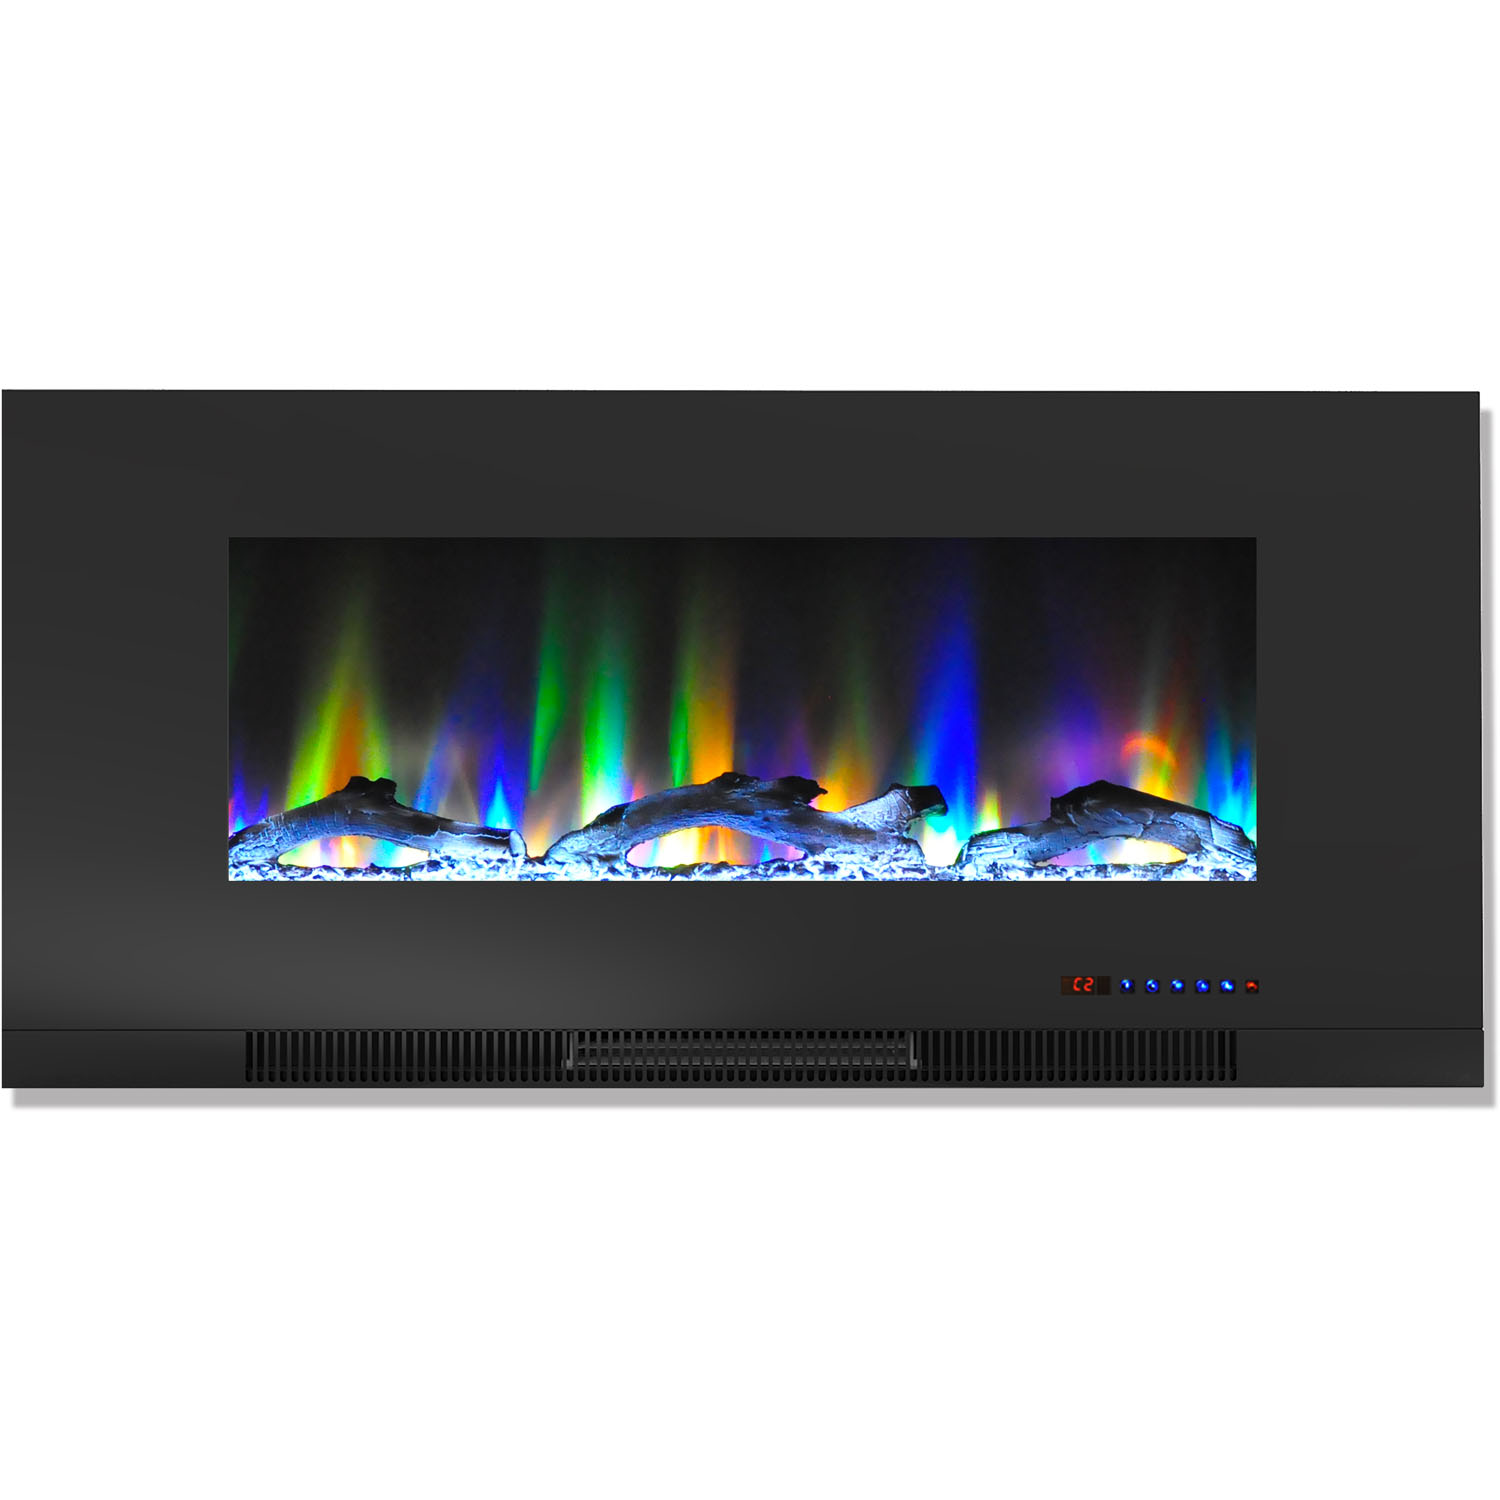 Cambridge 42" Wall-Mount Electric Fireplace Heater with Multi-Color LED Flames and Driftwood Log Display - image 4 of 14